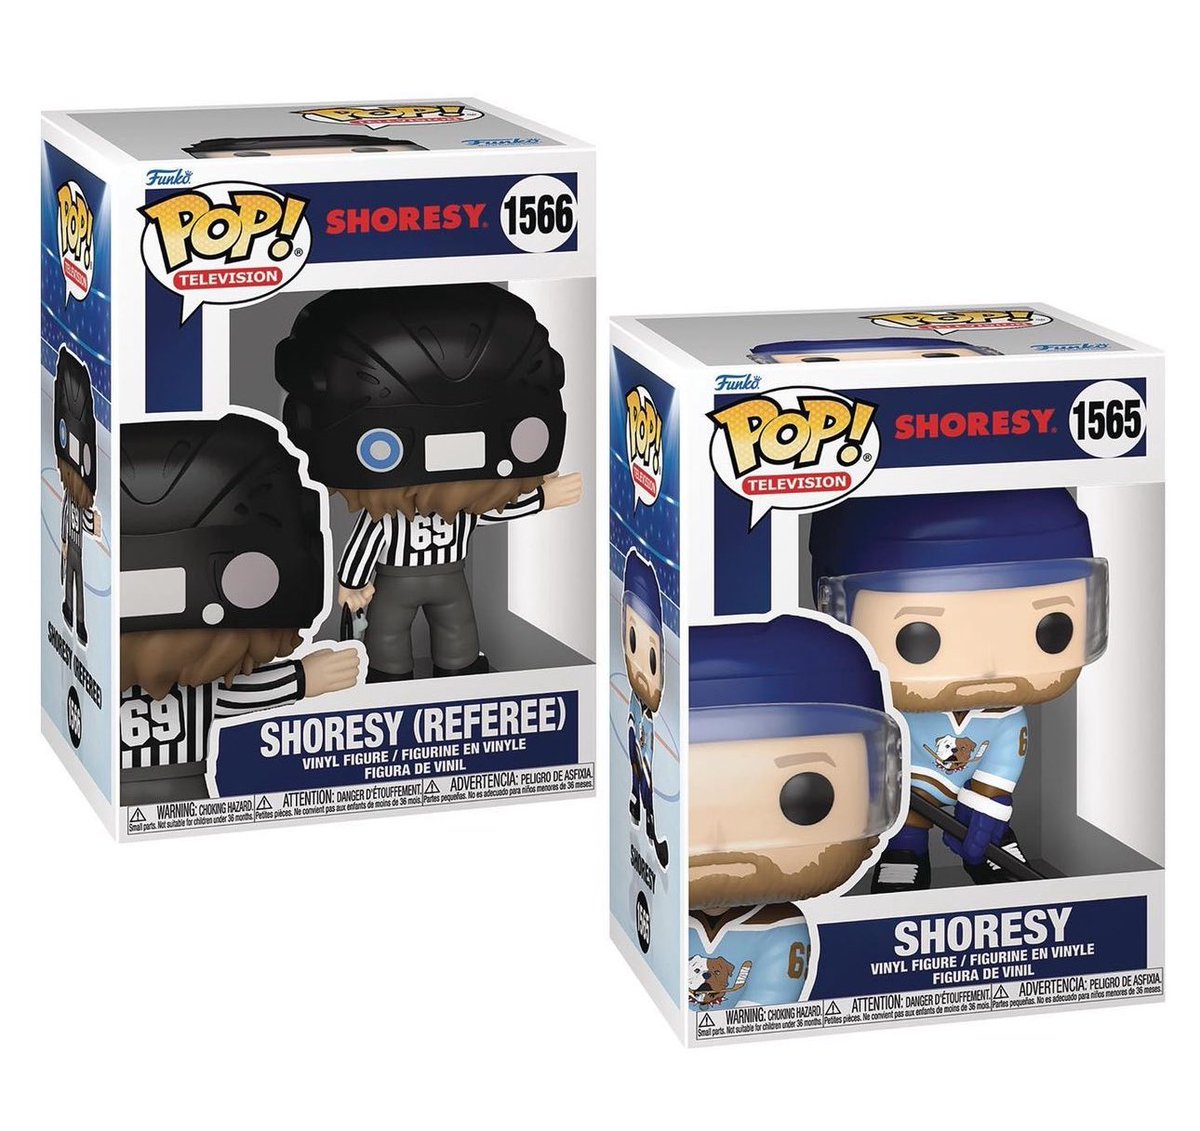 First look at Shoresy Pops!
.
Credit @funkoinfo_
#Shoresy #Funko #FunkoPop #FunkoPopVinyl #Pop #PopVinyl #Collectibles #Collectible #FunkoCollector #FunkoPops #Collector #Toy #Toys #DisTrackers